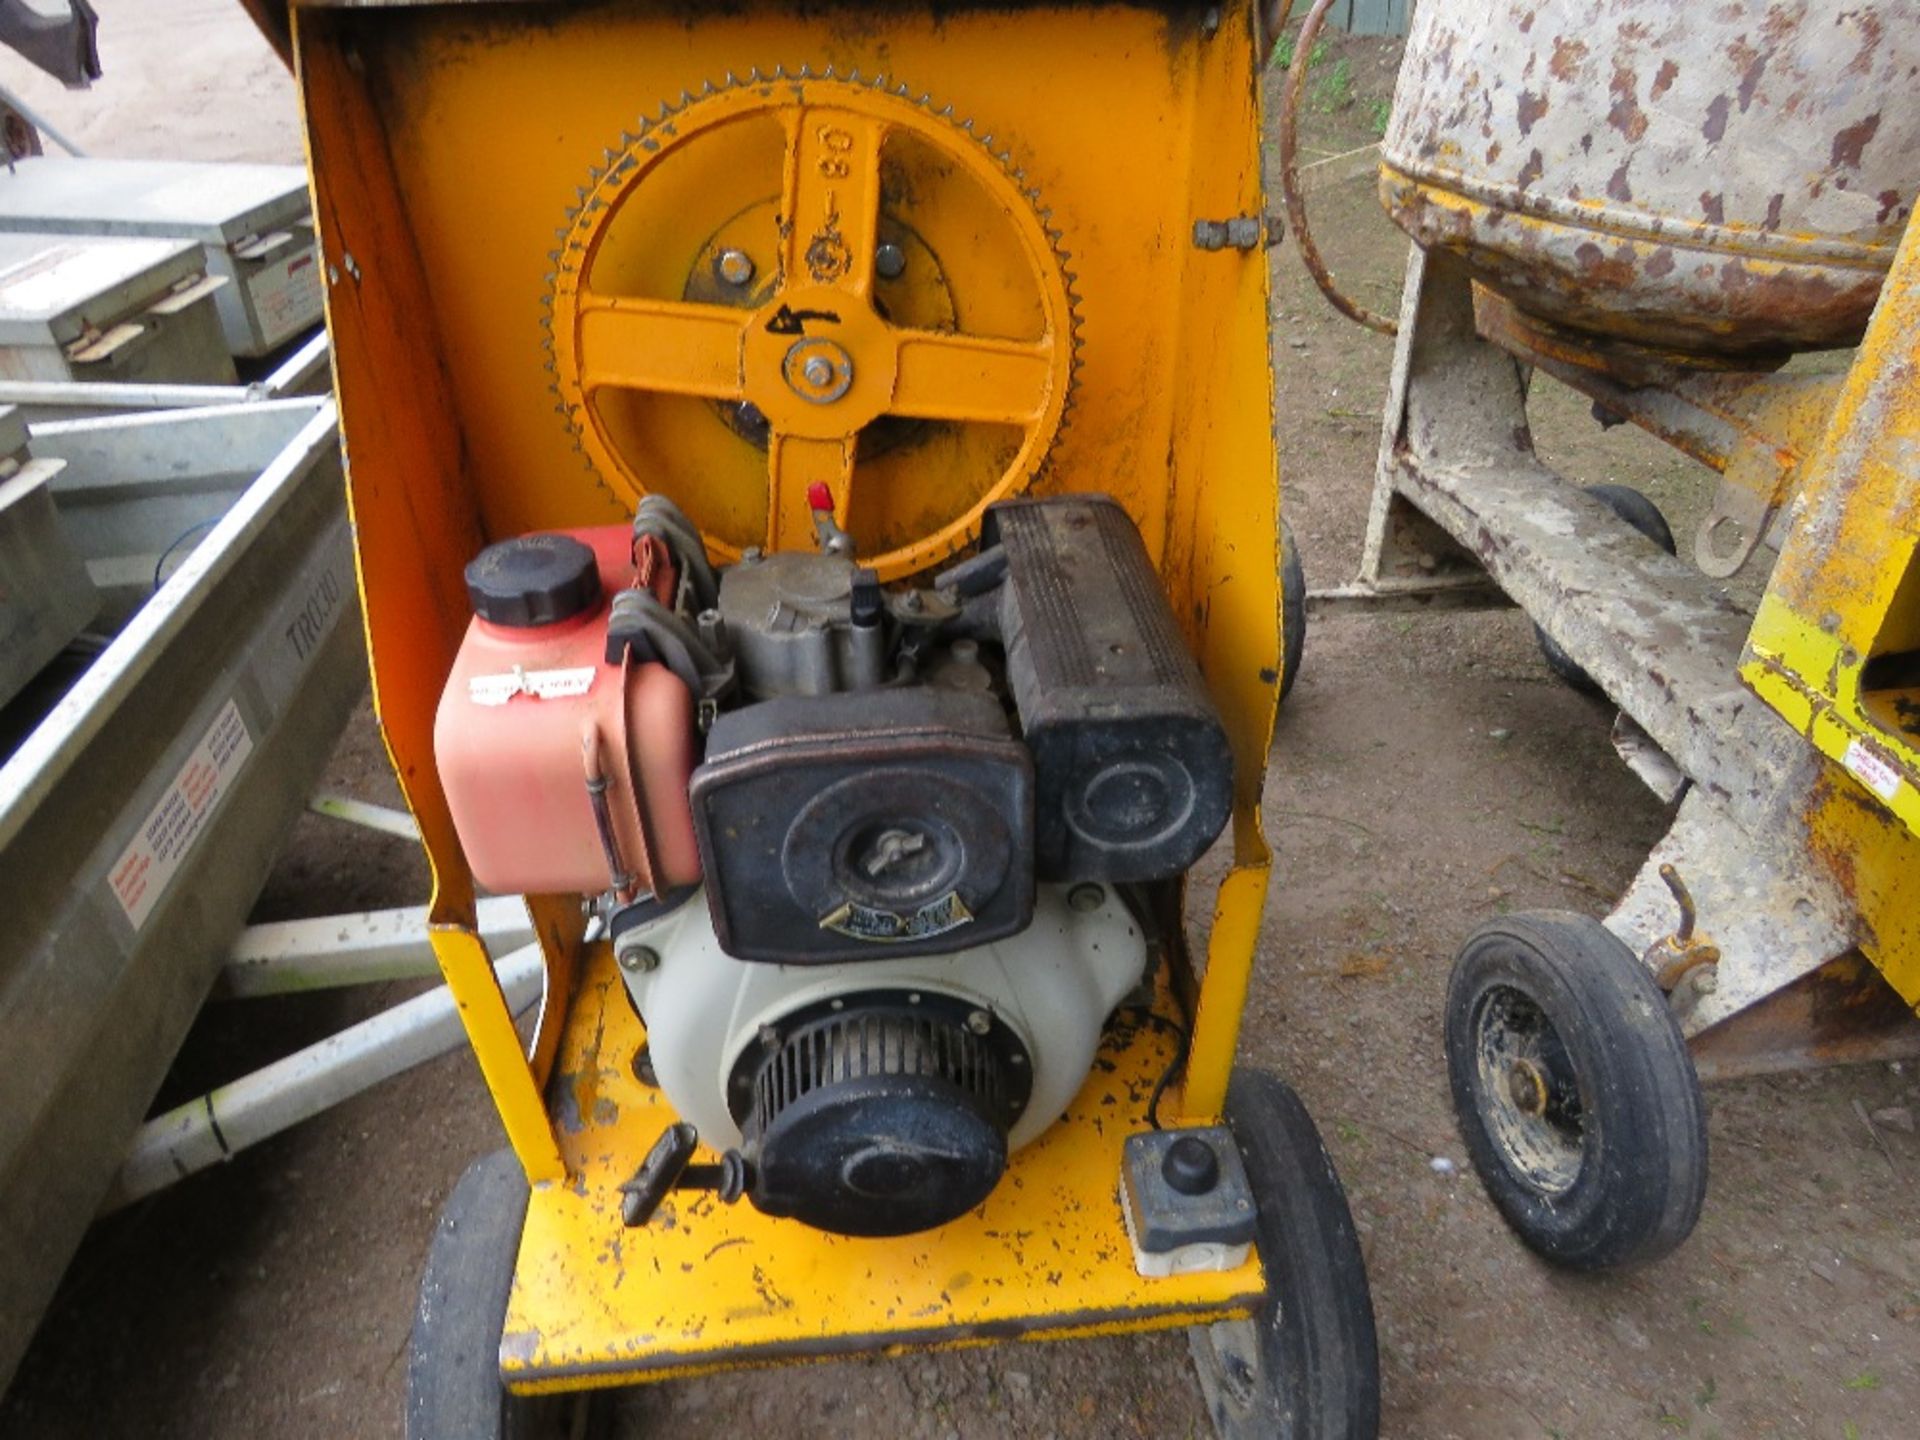 BARROWMIX YANMAR ENGINED DIESEL ELECTRIC START SITE CEMENT MIXER CM072. - Image 3 of 4